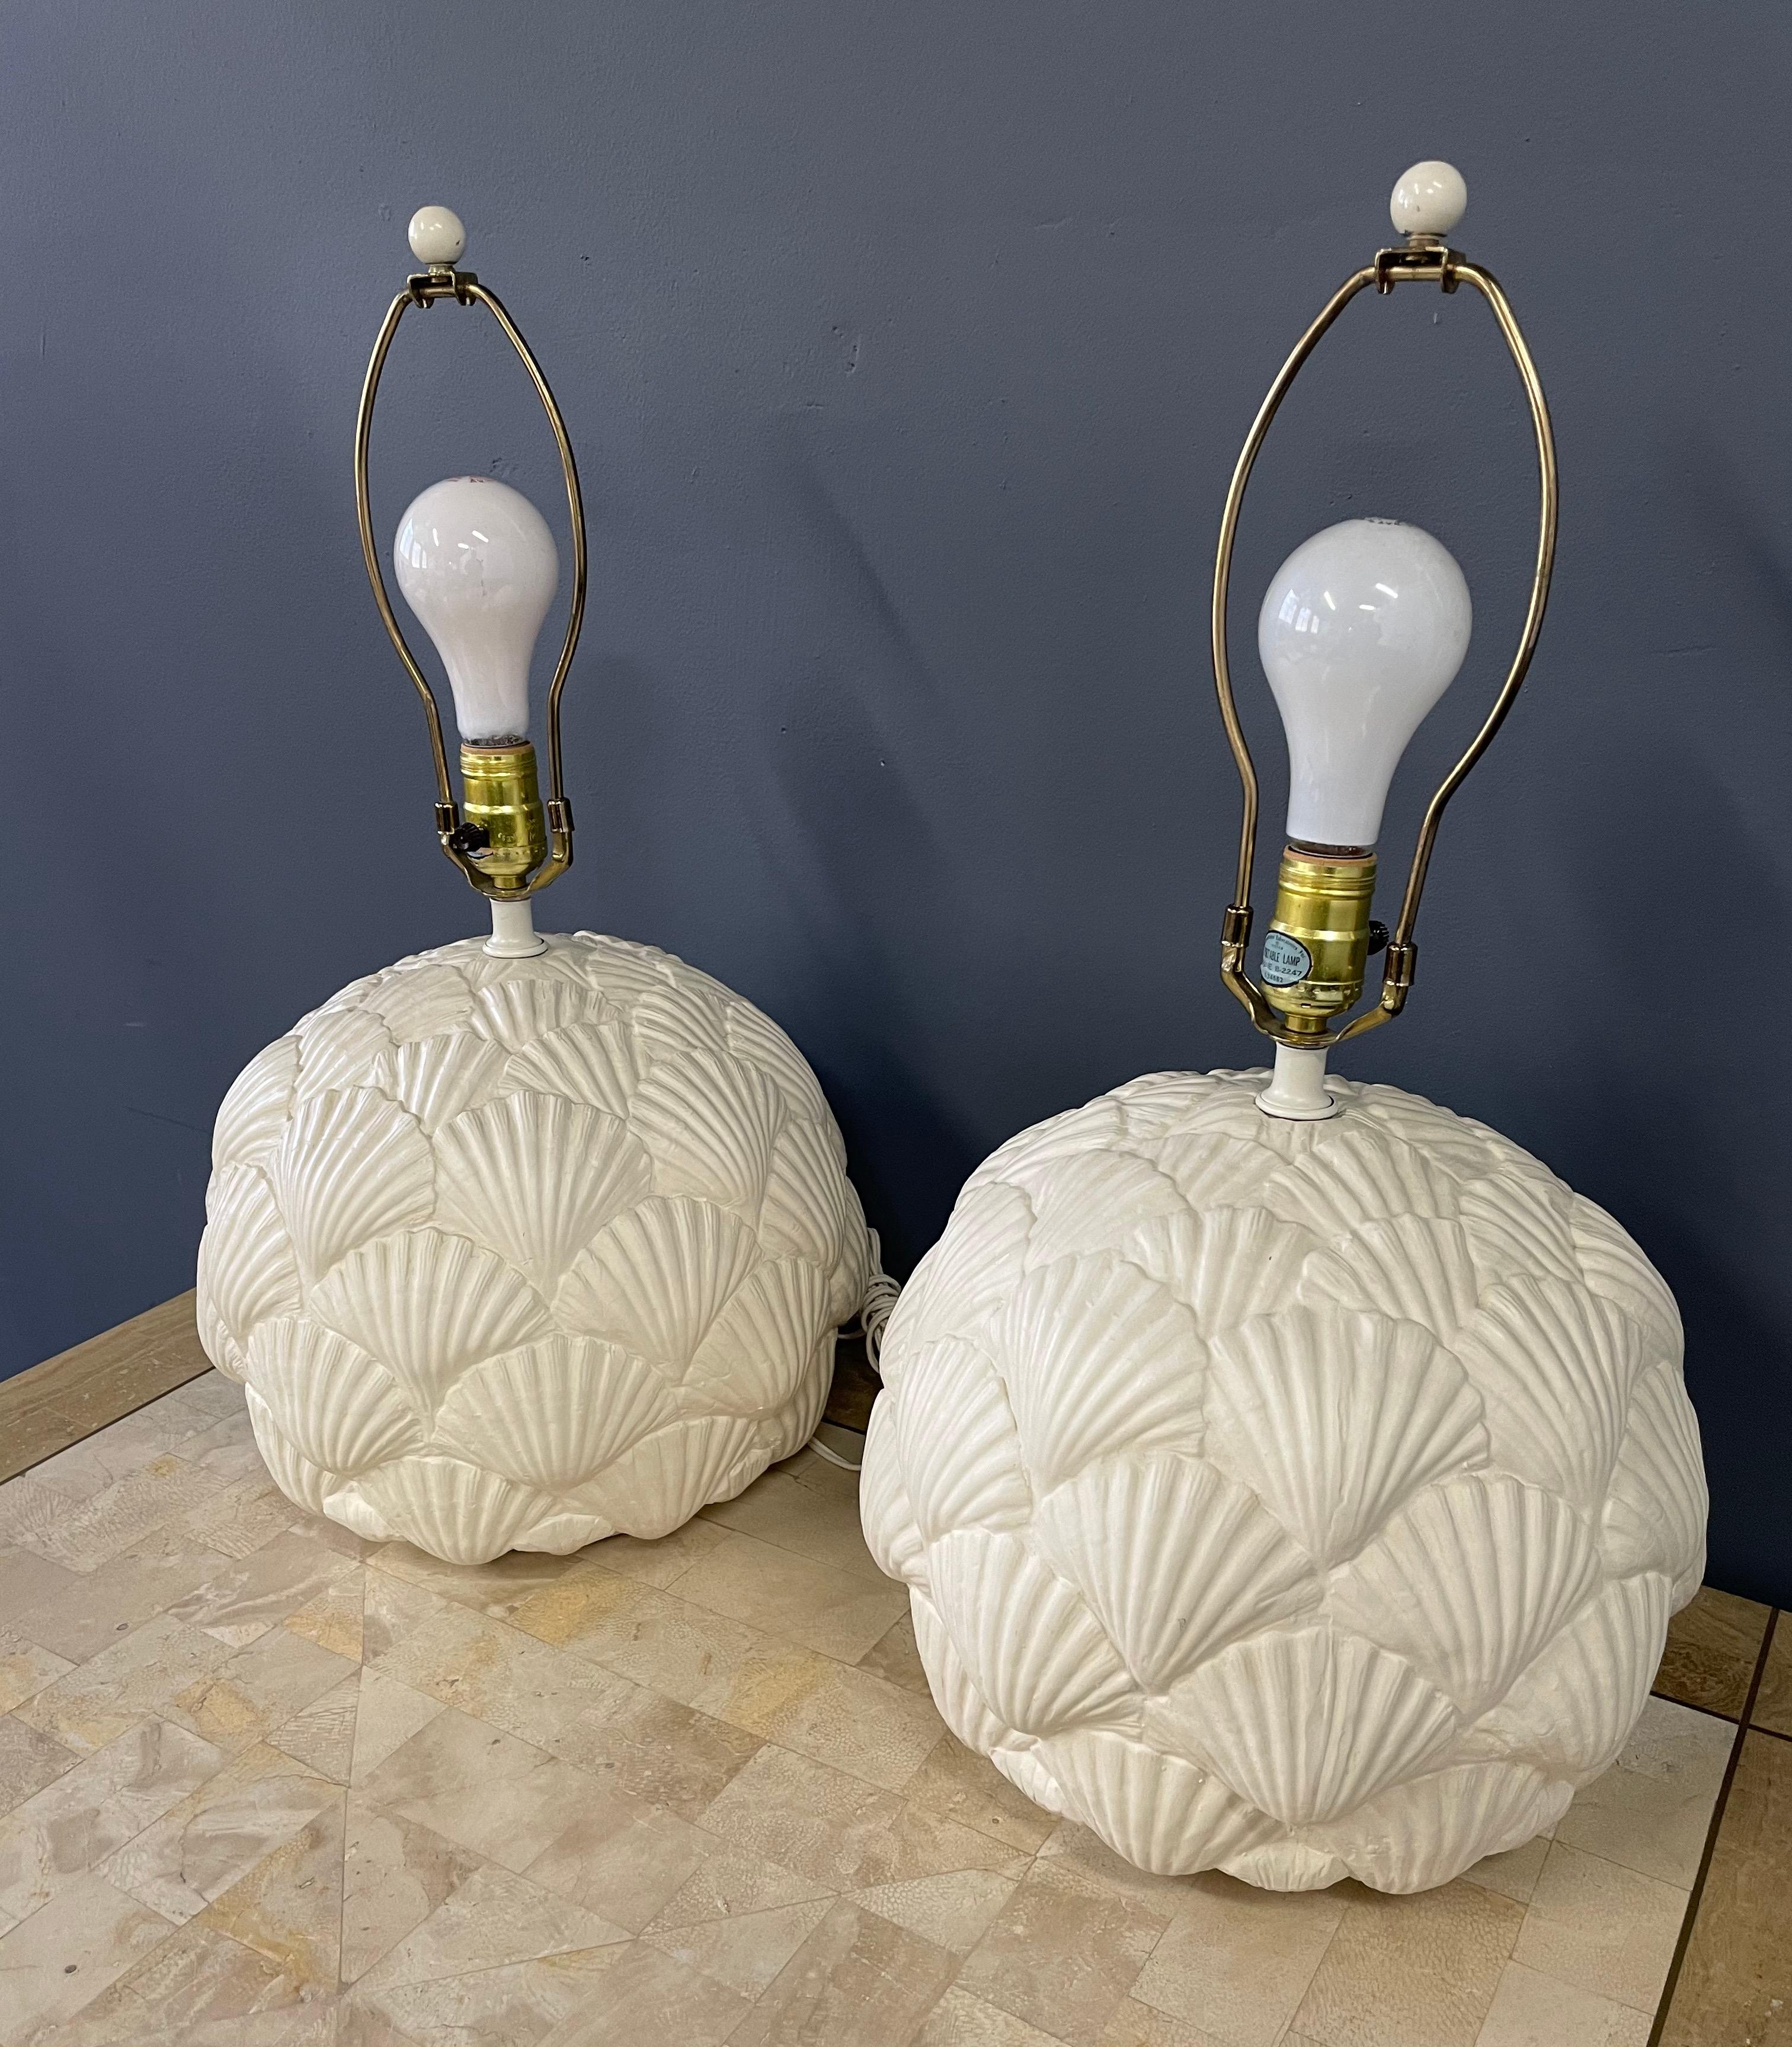 20th Century Italian White Ceramic Pair of Table Lamps with a Seashell Motif Mid Century